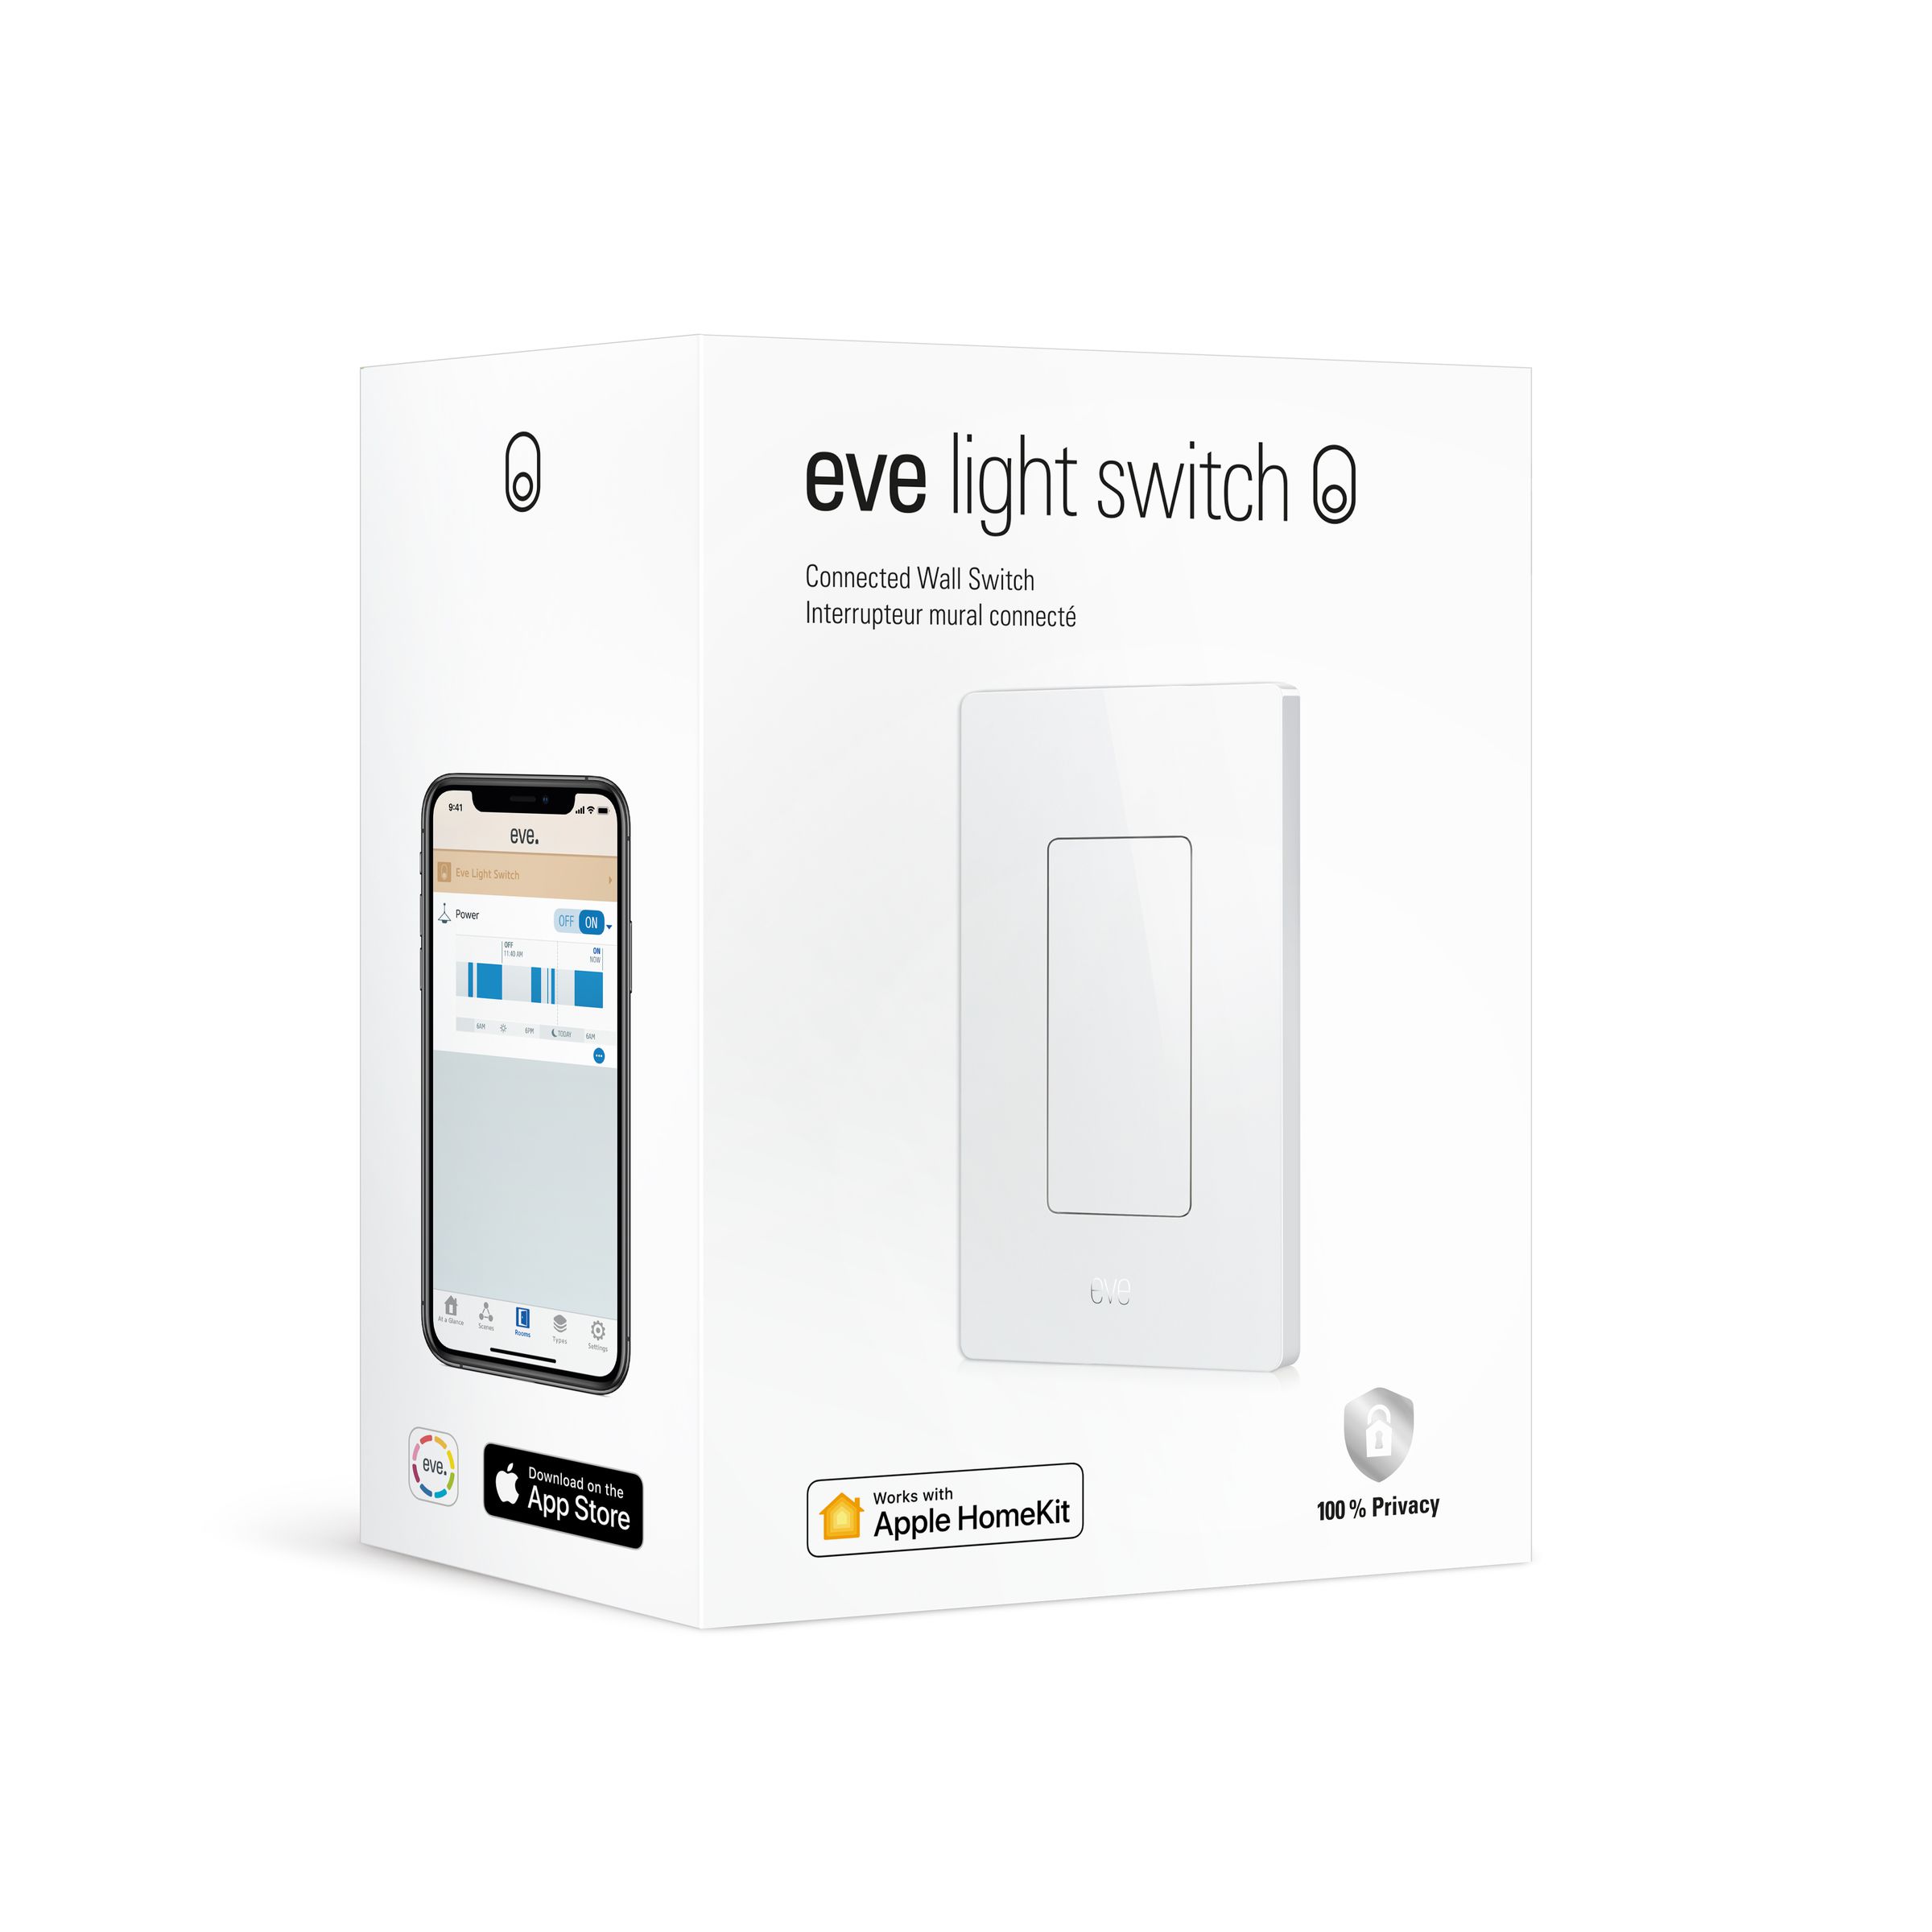 The Eve Light Switch works with Apple Home, but once Matter arrives, it should be compatible with more platforms.